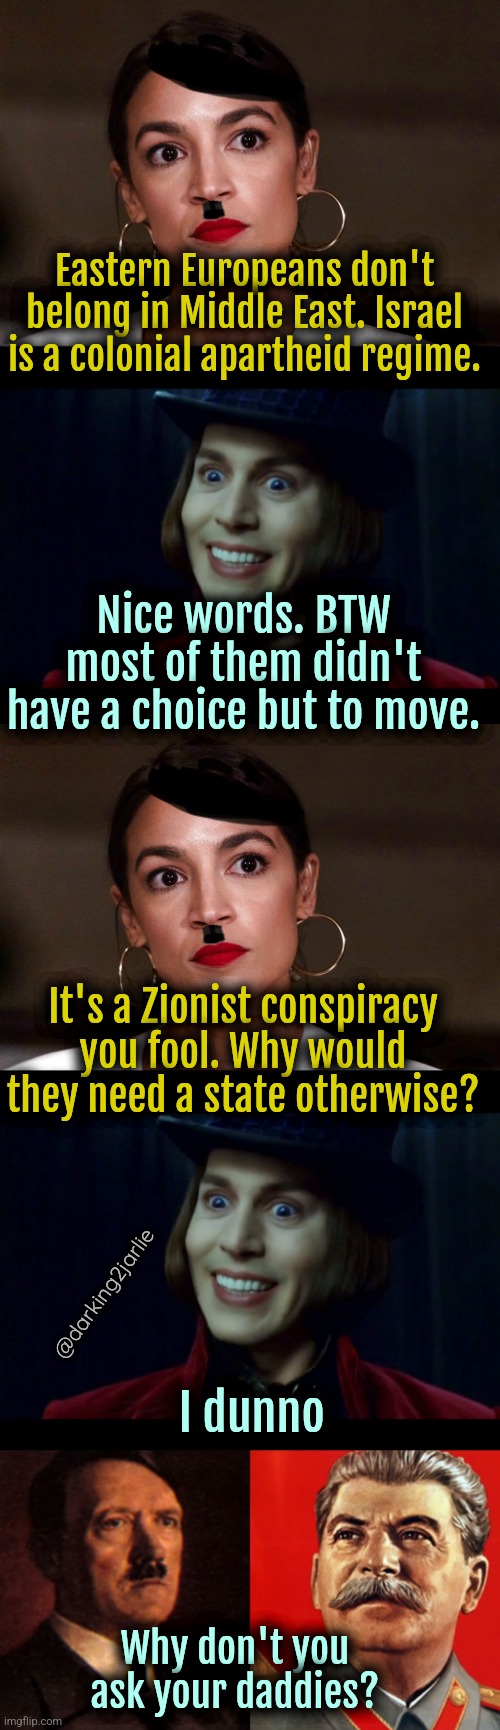 silly wonka little devil who cracked the code | Eastern Europeans don't belong in Middle East. Israel is a colonial apartheid regime. Nice words. BTW most of them didn't have a choice but to move. It's a Zionist conspiracy you fool. Why would they need a state otherwise? @darking2jarlie; I dunno; Why don't you ask your daddies? | image tagged in dictator dem,communism,nazi,fascism,jews,israel | made w/ Imgflip meme maker